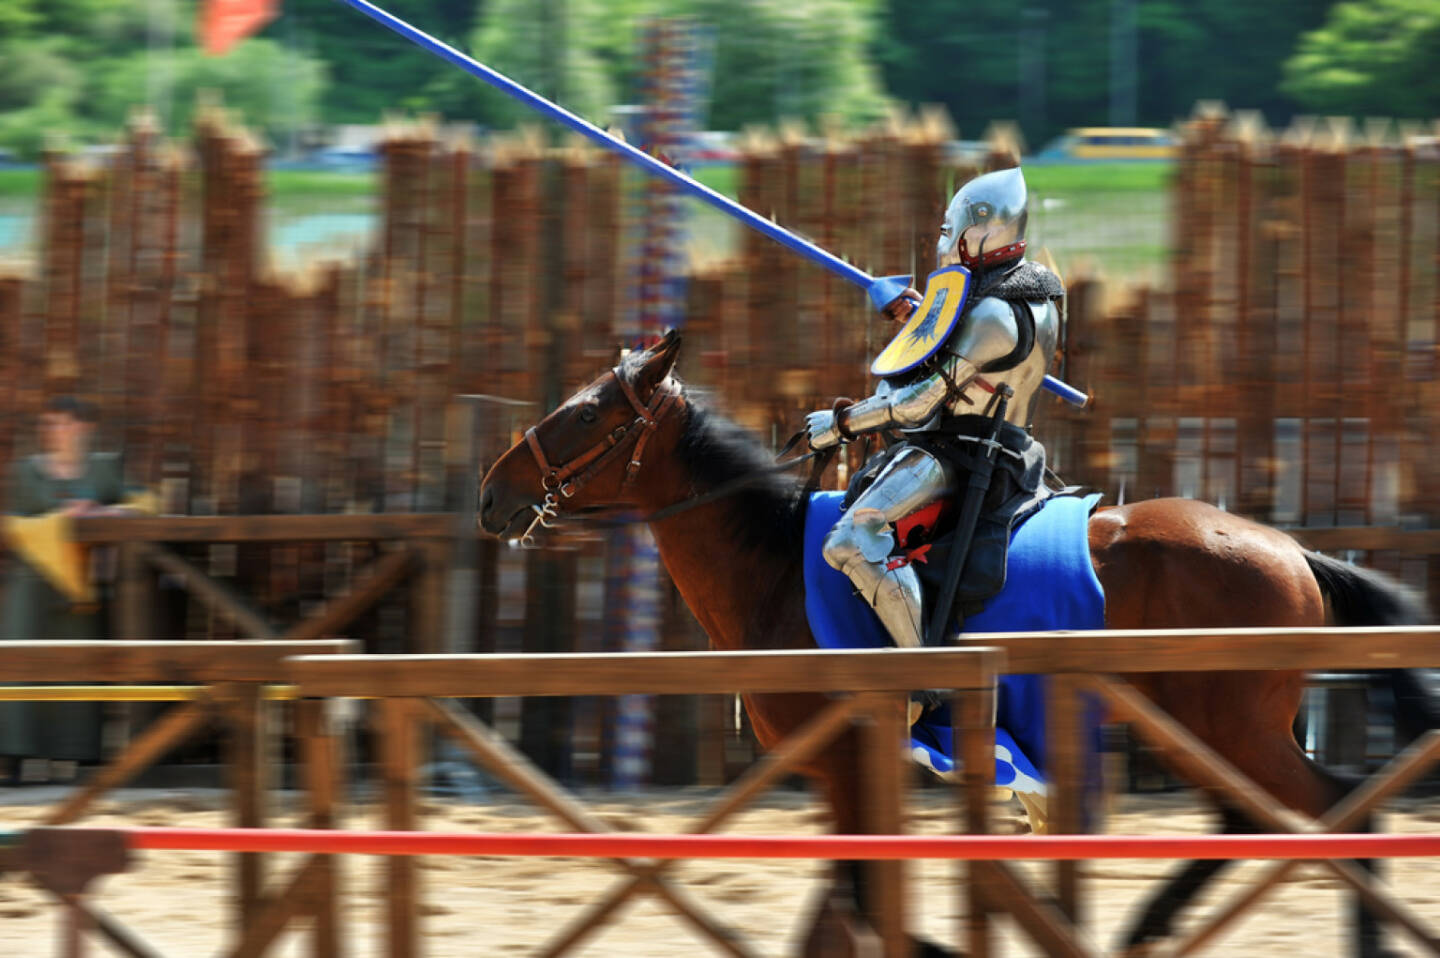 Ritter, Kampf, Lanze, Wettkampf, Reiter, Pferd, Turnier, http://www.shutterstock.com/de/pic-84060124/stock-photo-armored-medieval-knight-on-horseback-at-jousting-competition.html 